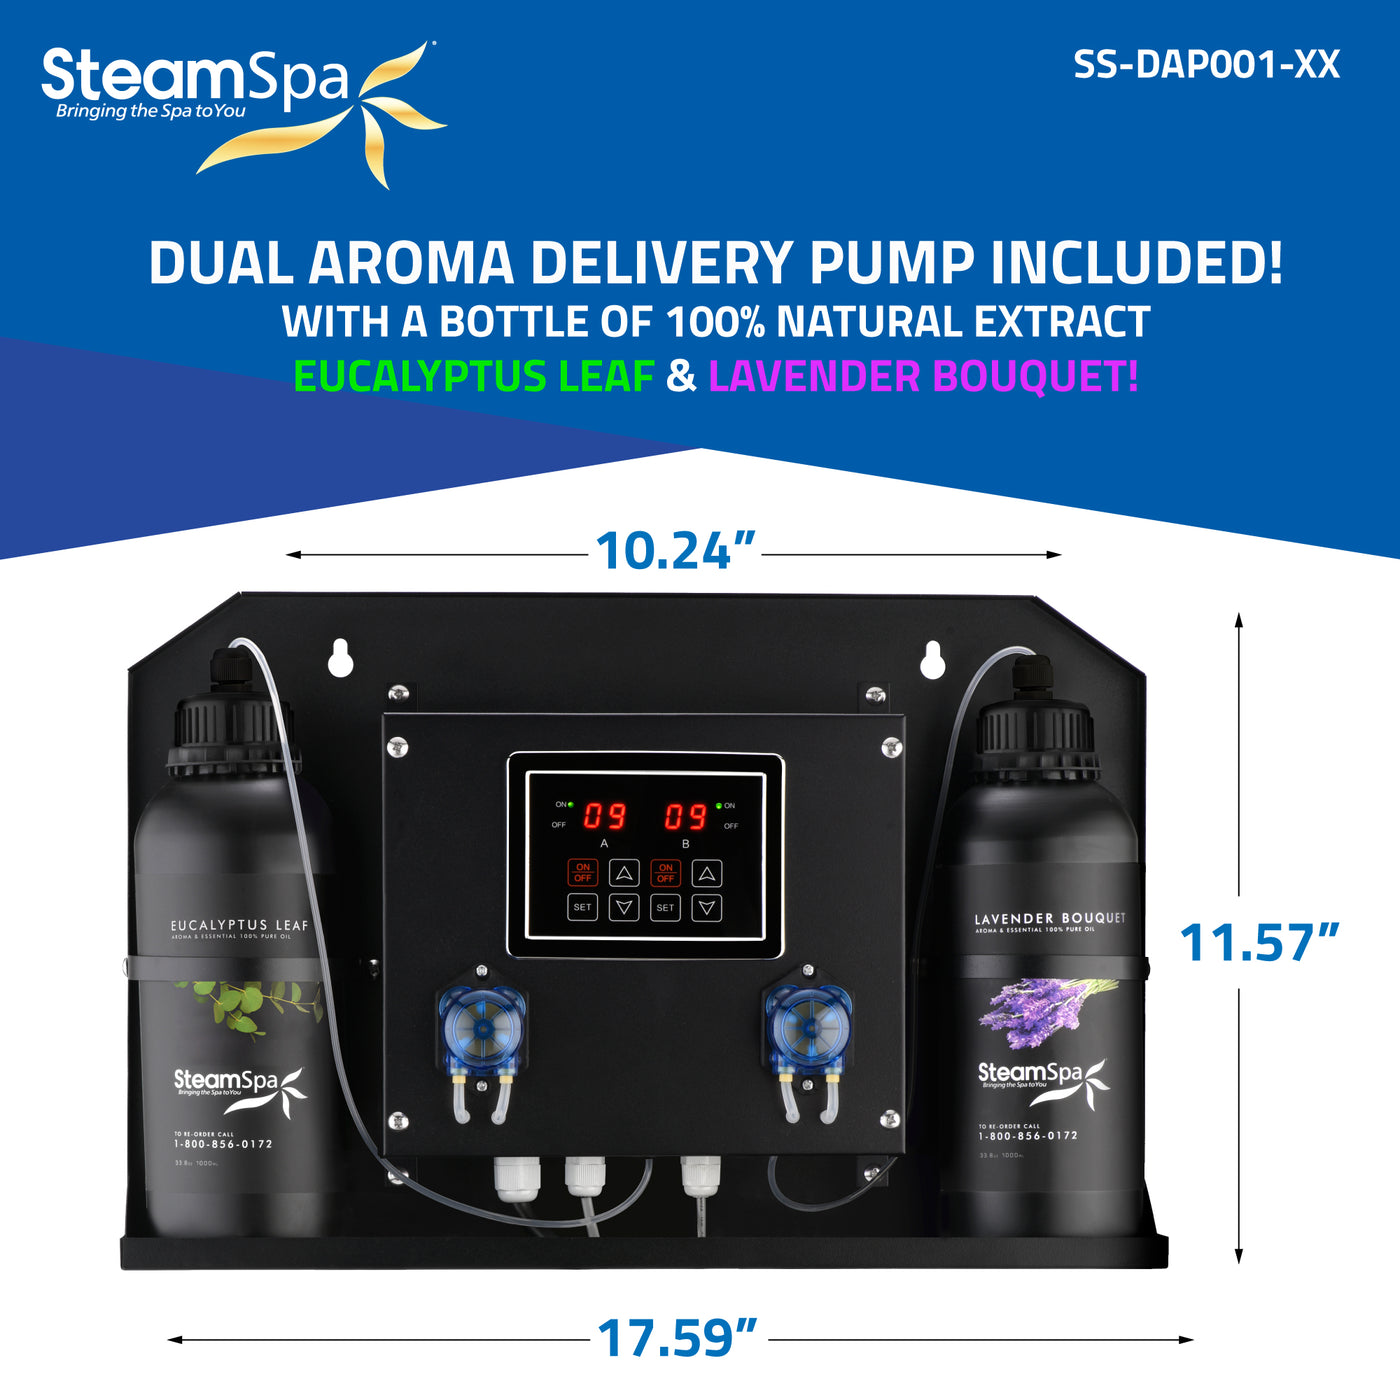 Black Series WiFi and Bluetooth 7.5kW QuickStart Steam Bath Generator Package with Dual Aroma Pump in Polished Chrome BKT750CH-ADP